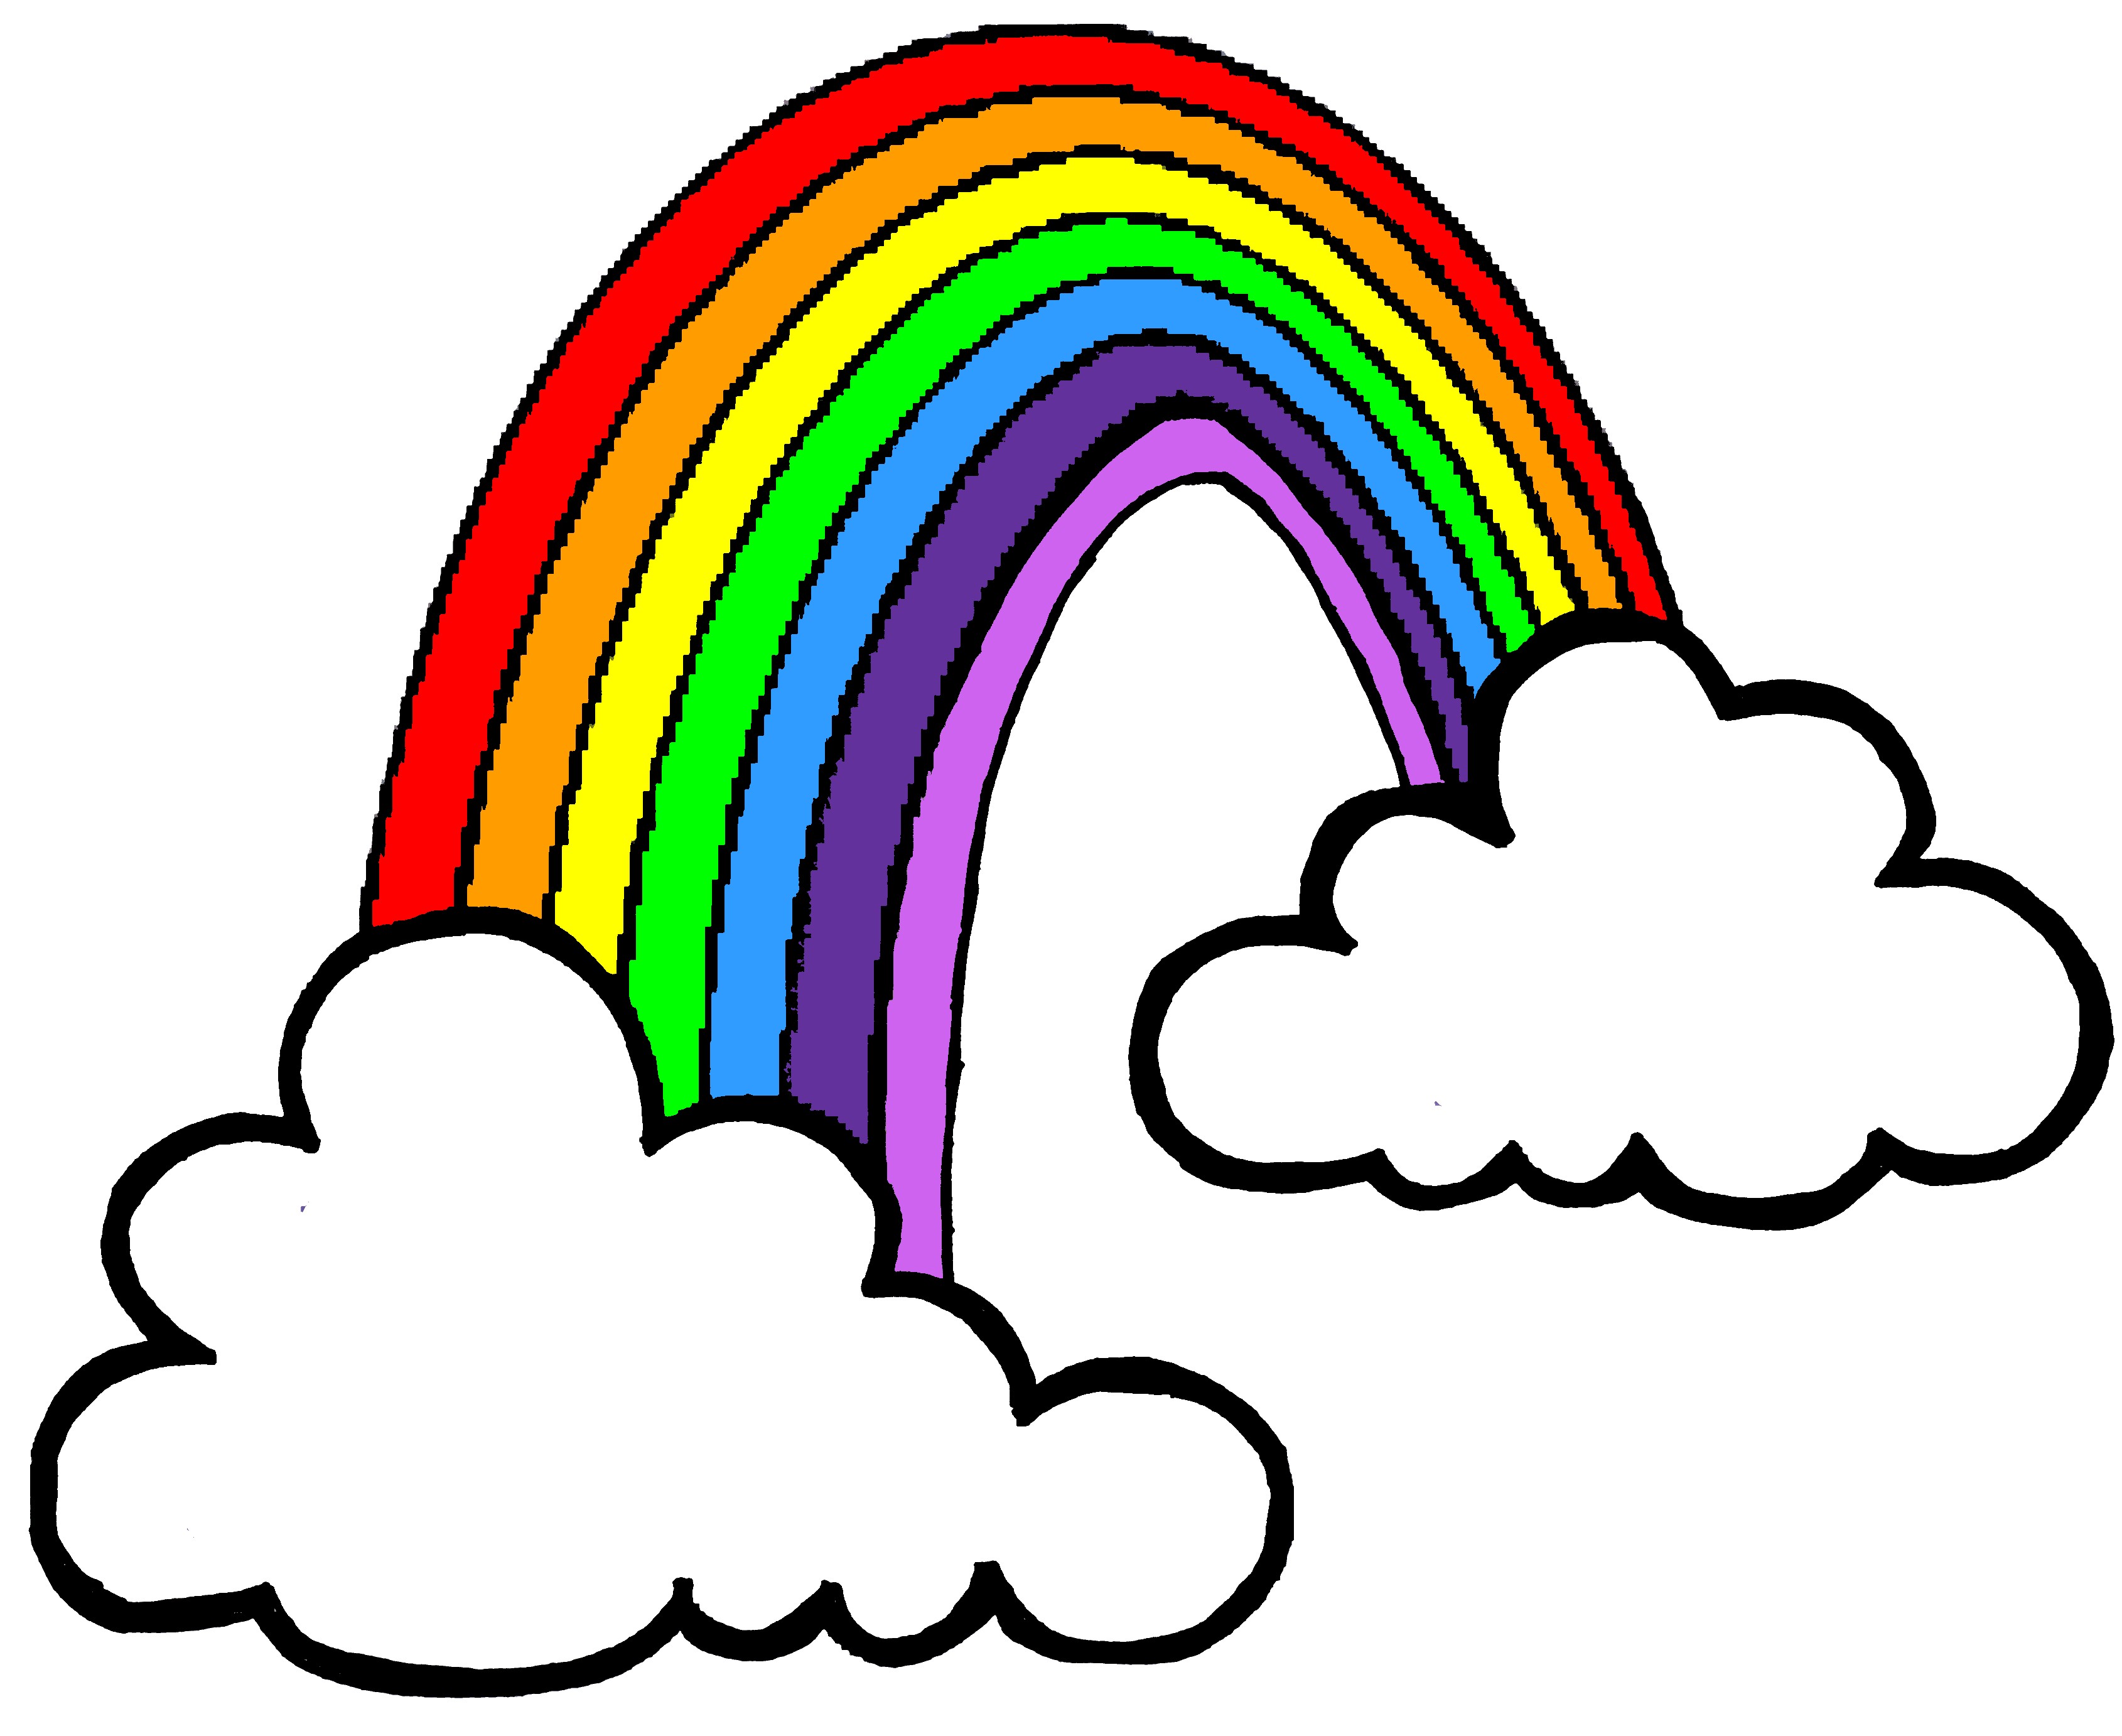 Rainbow 20clipart | Clipart Panda - Free Clipart Images